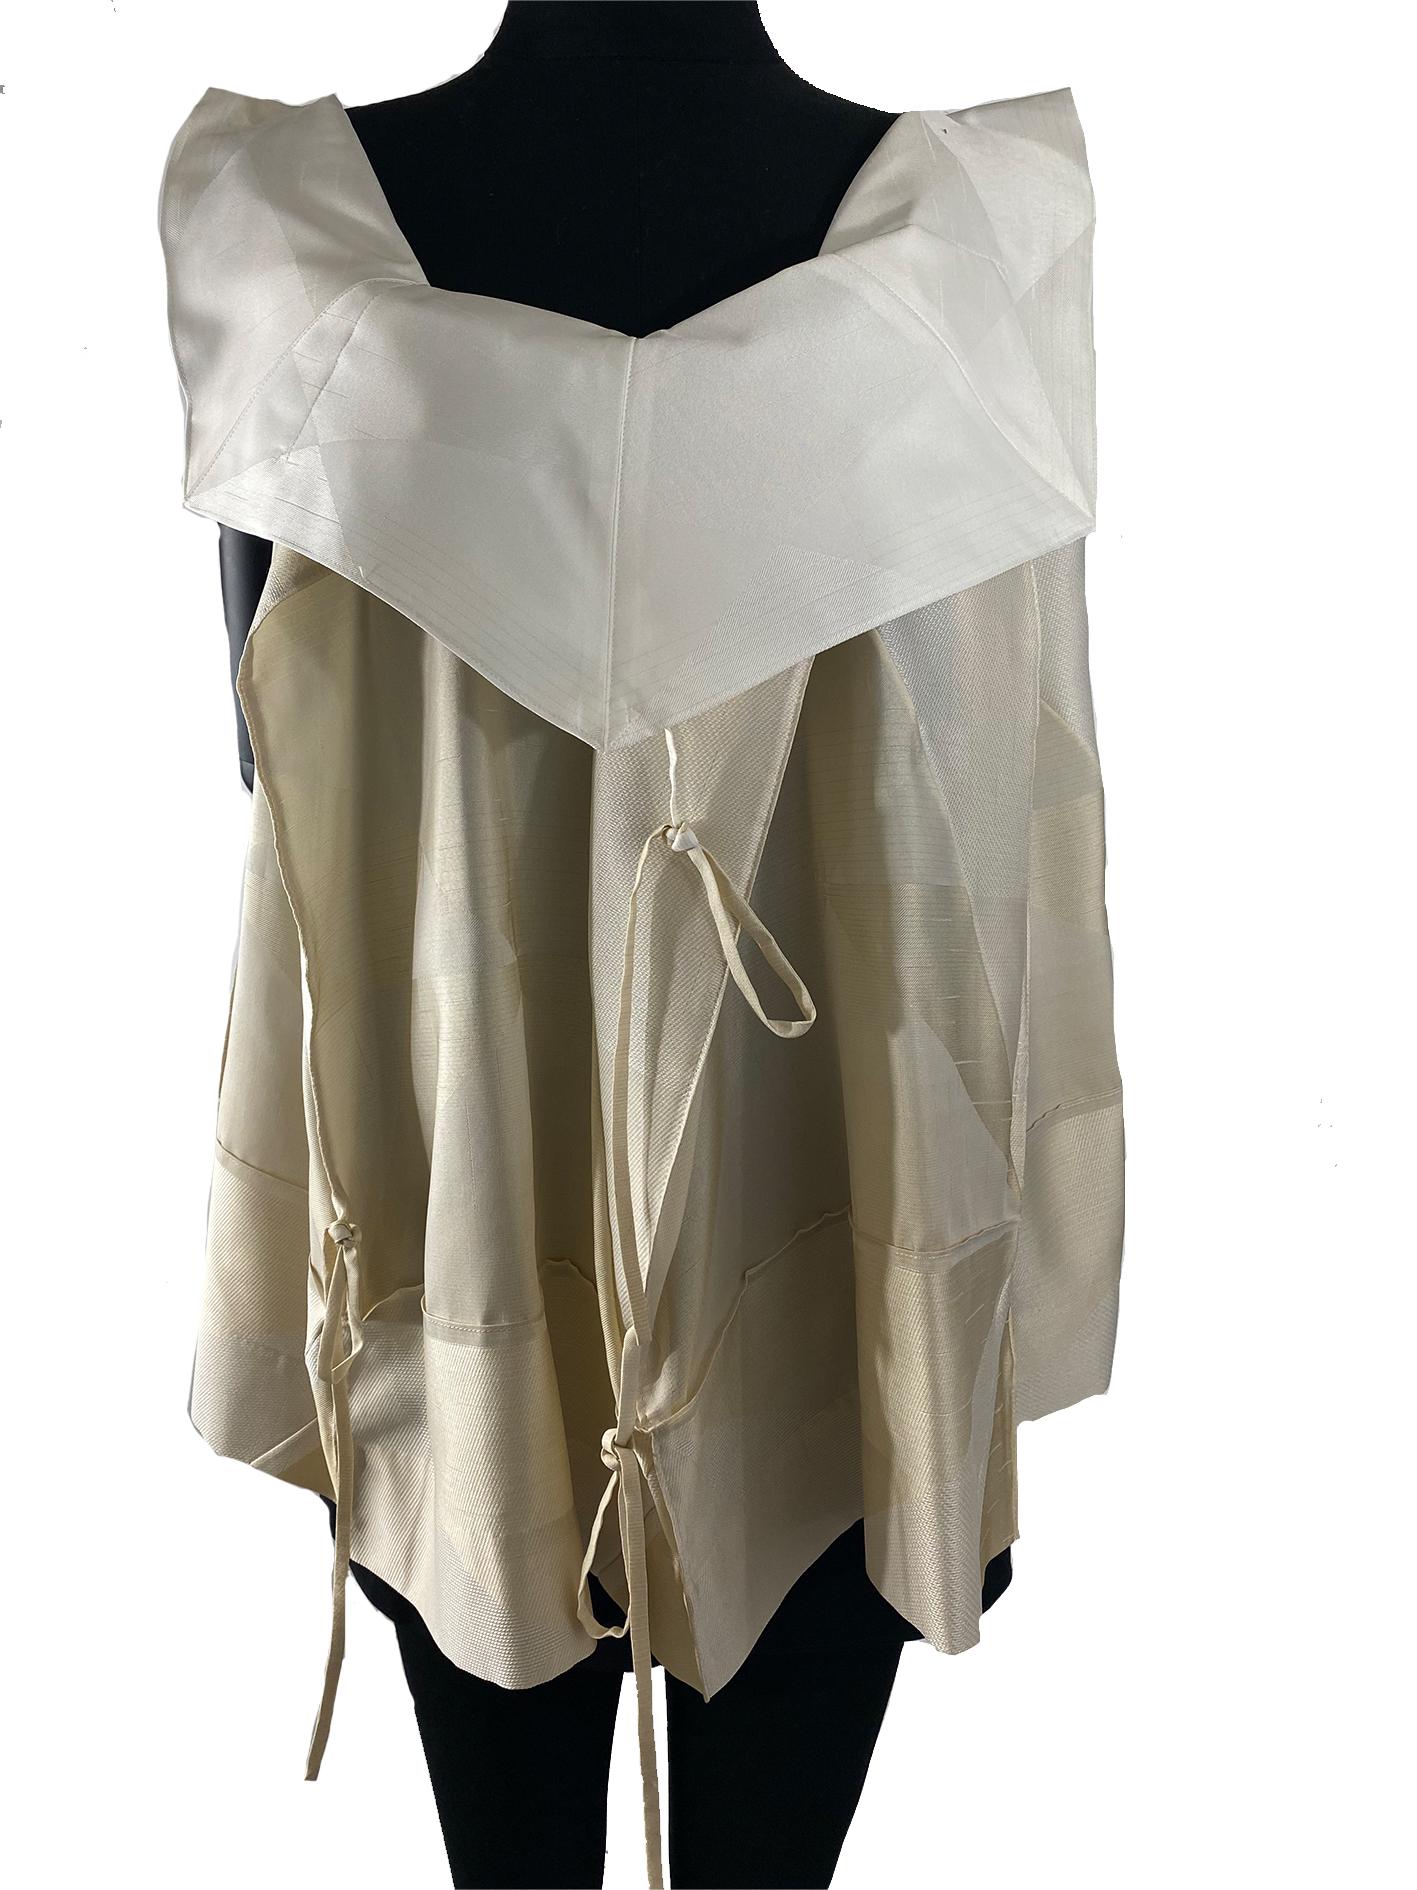 A late 1990’s Issey Miyake unstructured top of oatmeal, cream and off-white silk mixture damask, featuring an angular neckline with complementing ivory bib collar, and cut-away armholes, finished with decorative ties throughout. This item carries